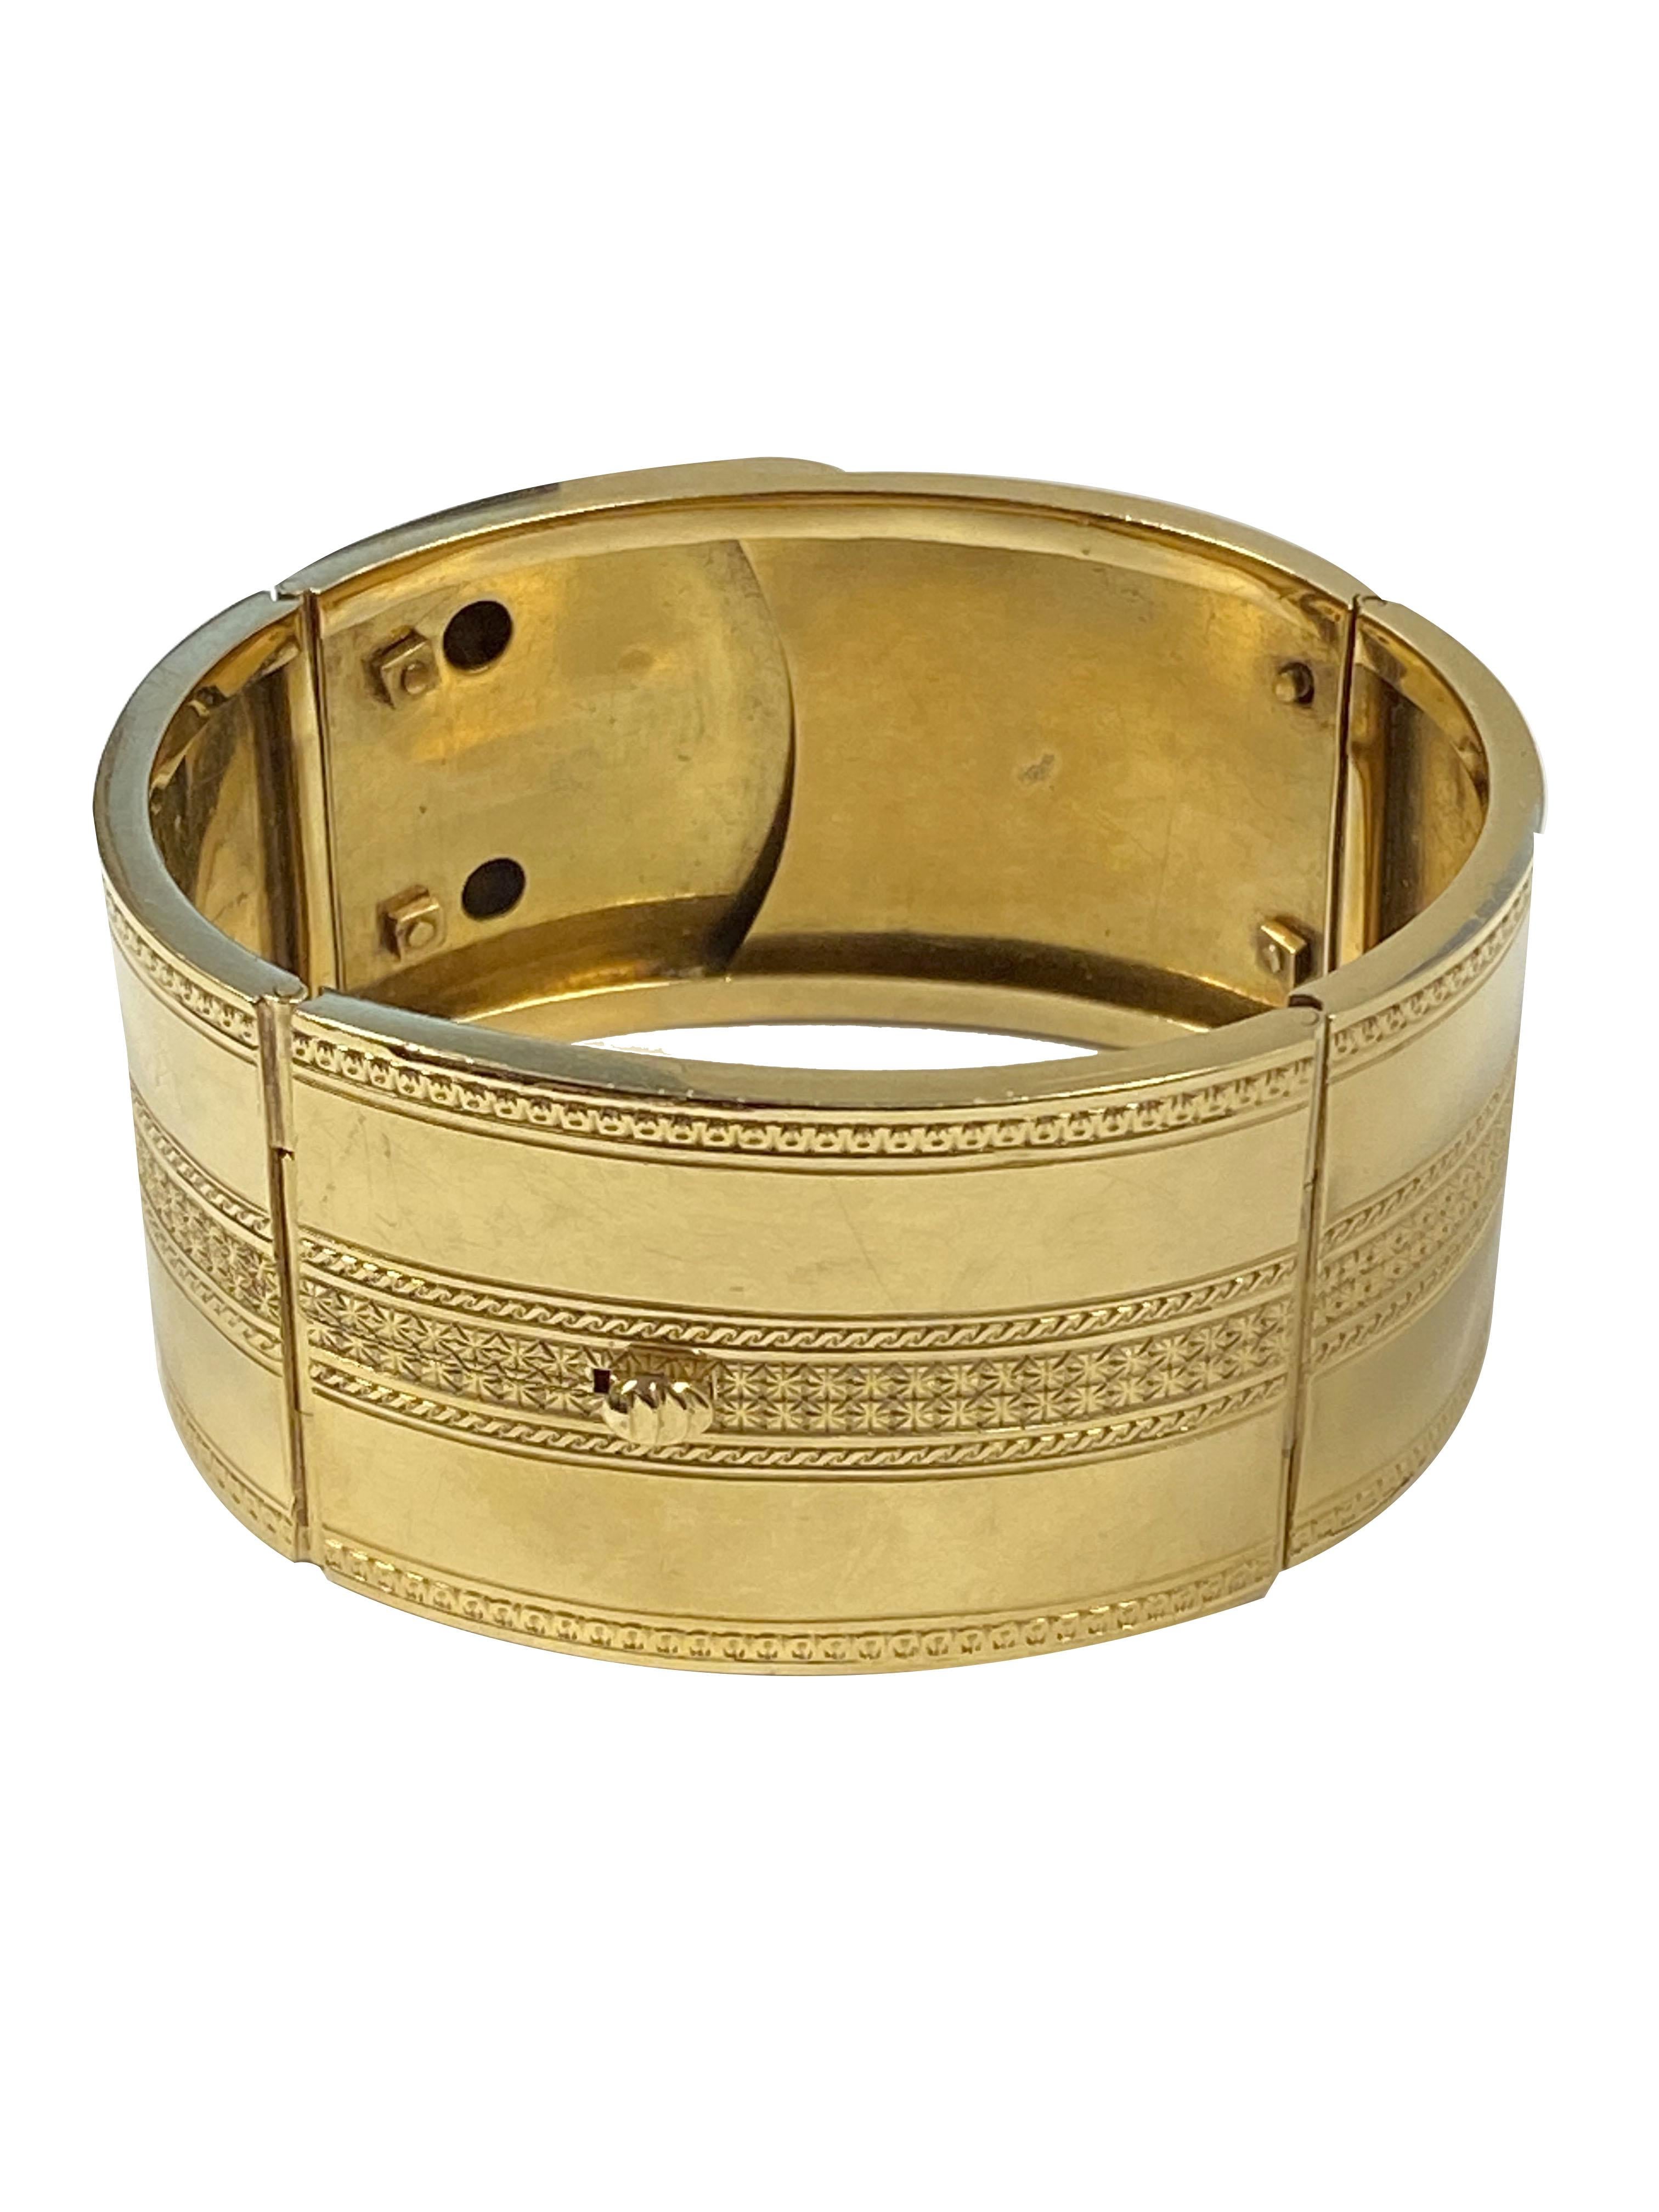 Circa 1880 14K Yellow Gold hinged Bangle Bracelet, measuring 1 1/4 inches wide, hinged in 4 sections for flexibility also features a locking clasp for easy on and off. The top sections are set with Emeralds, pearls and Rubies, further finished in